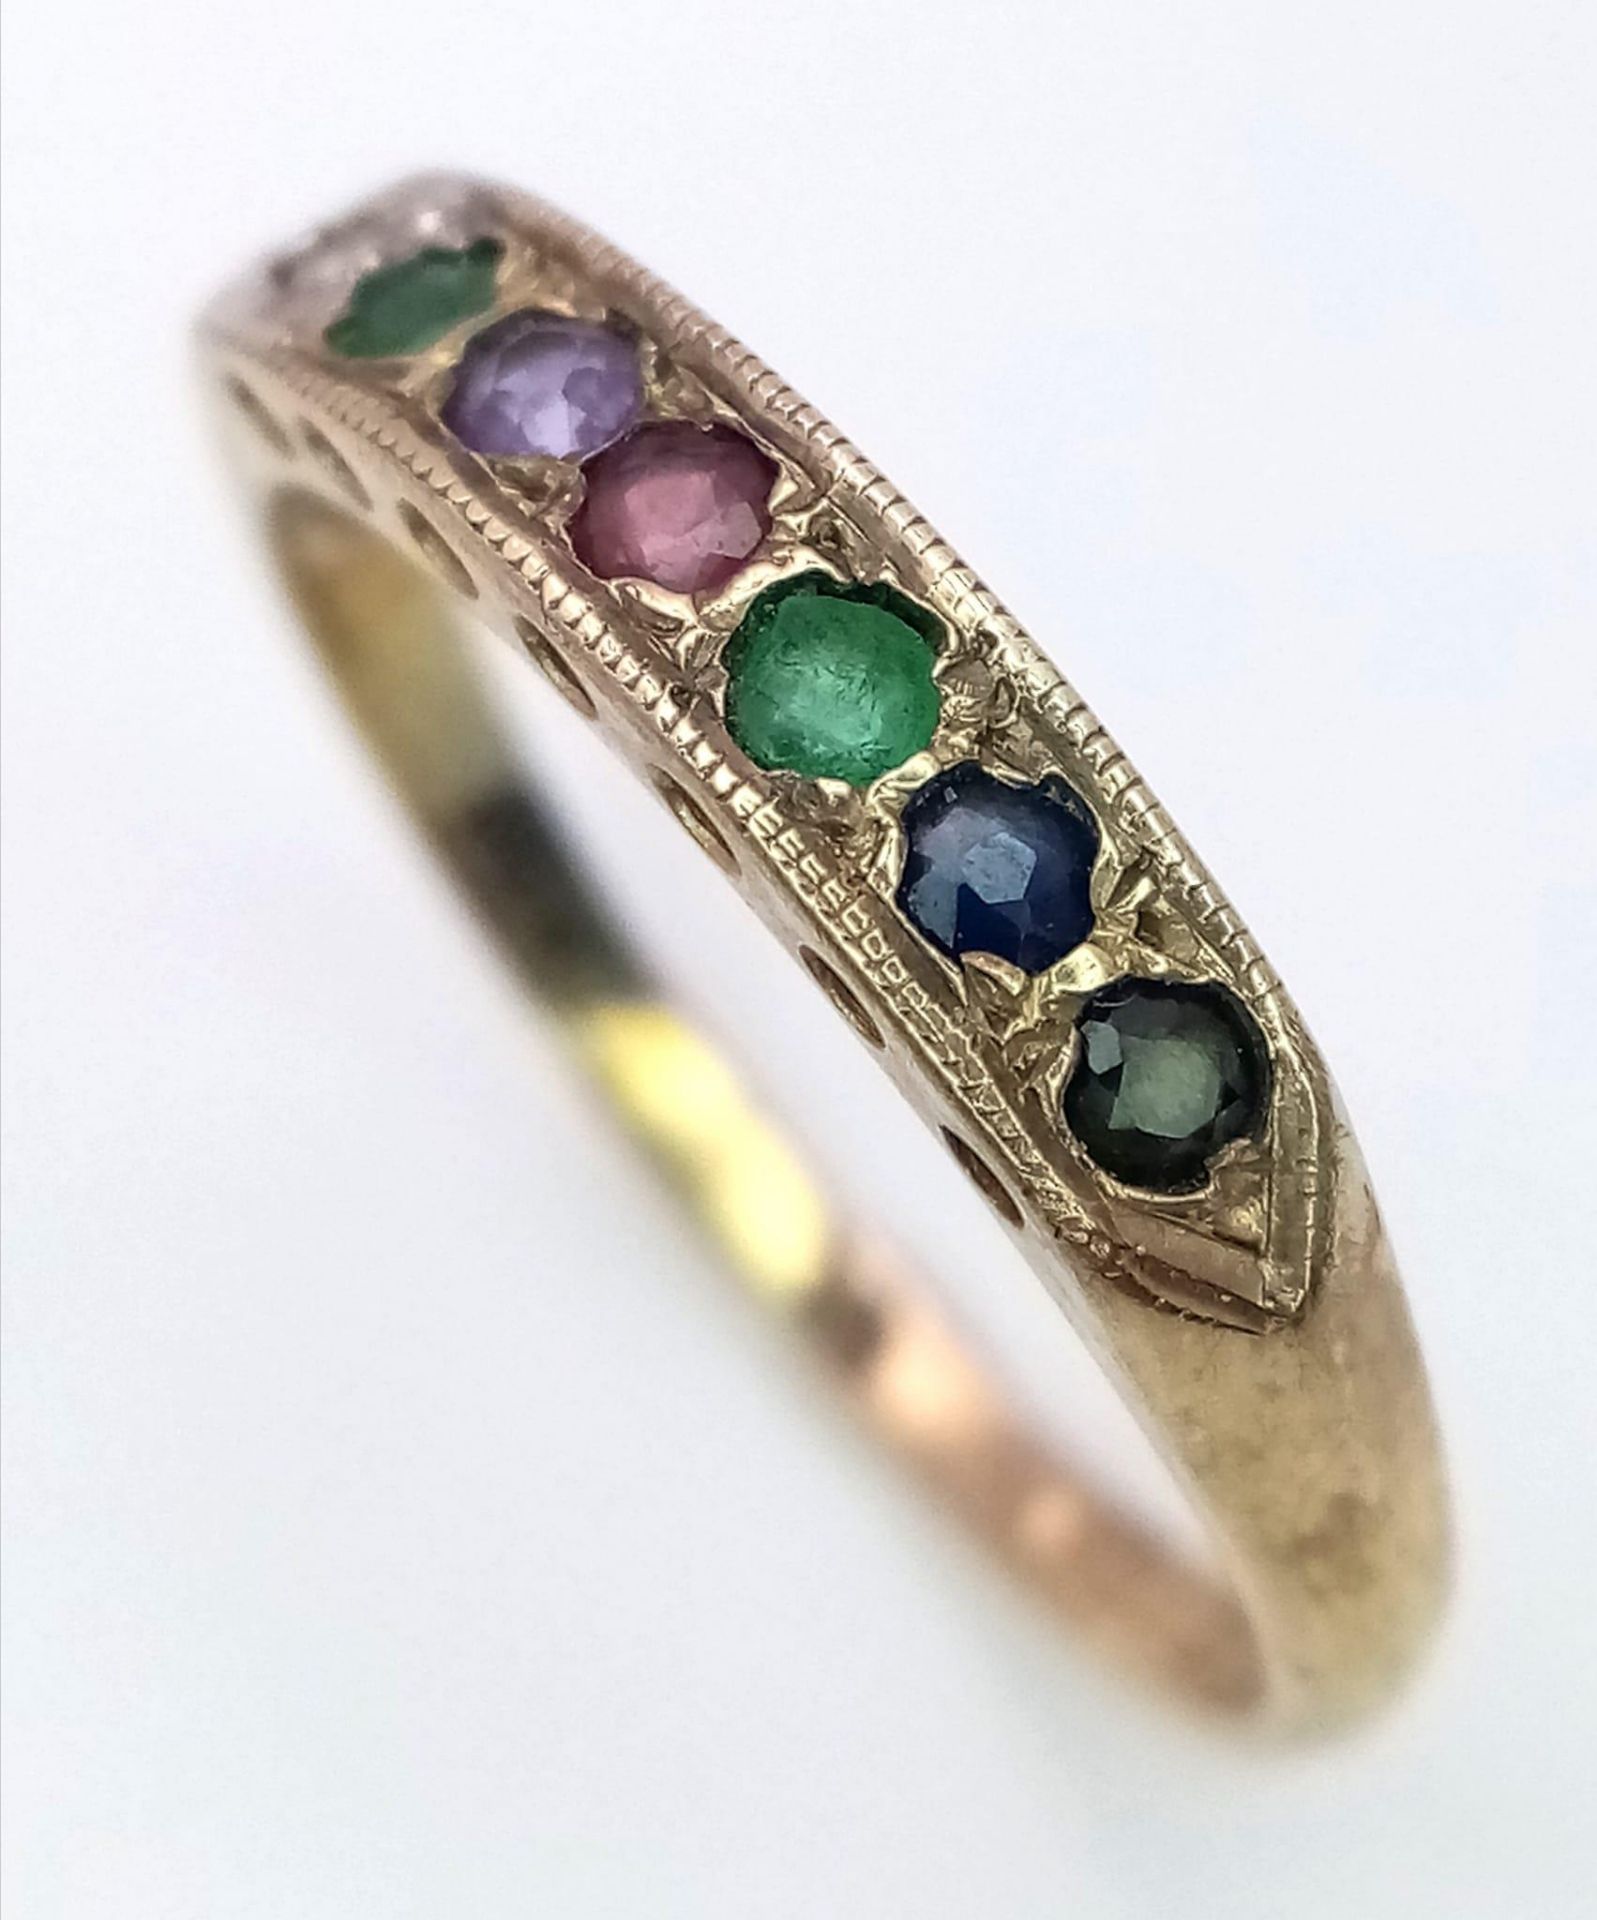 A VINTAGE 9K YELLOW GOLD DEAREST RING SET WITH DIAMOND, EMERALD, AMETHSYT, RUBY, EMERALD, SAPPHIRE - Image 3 of 5